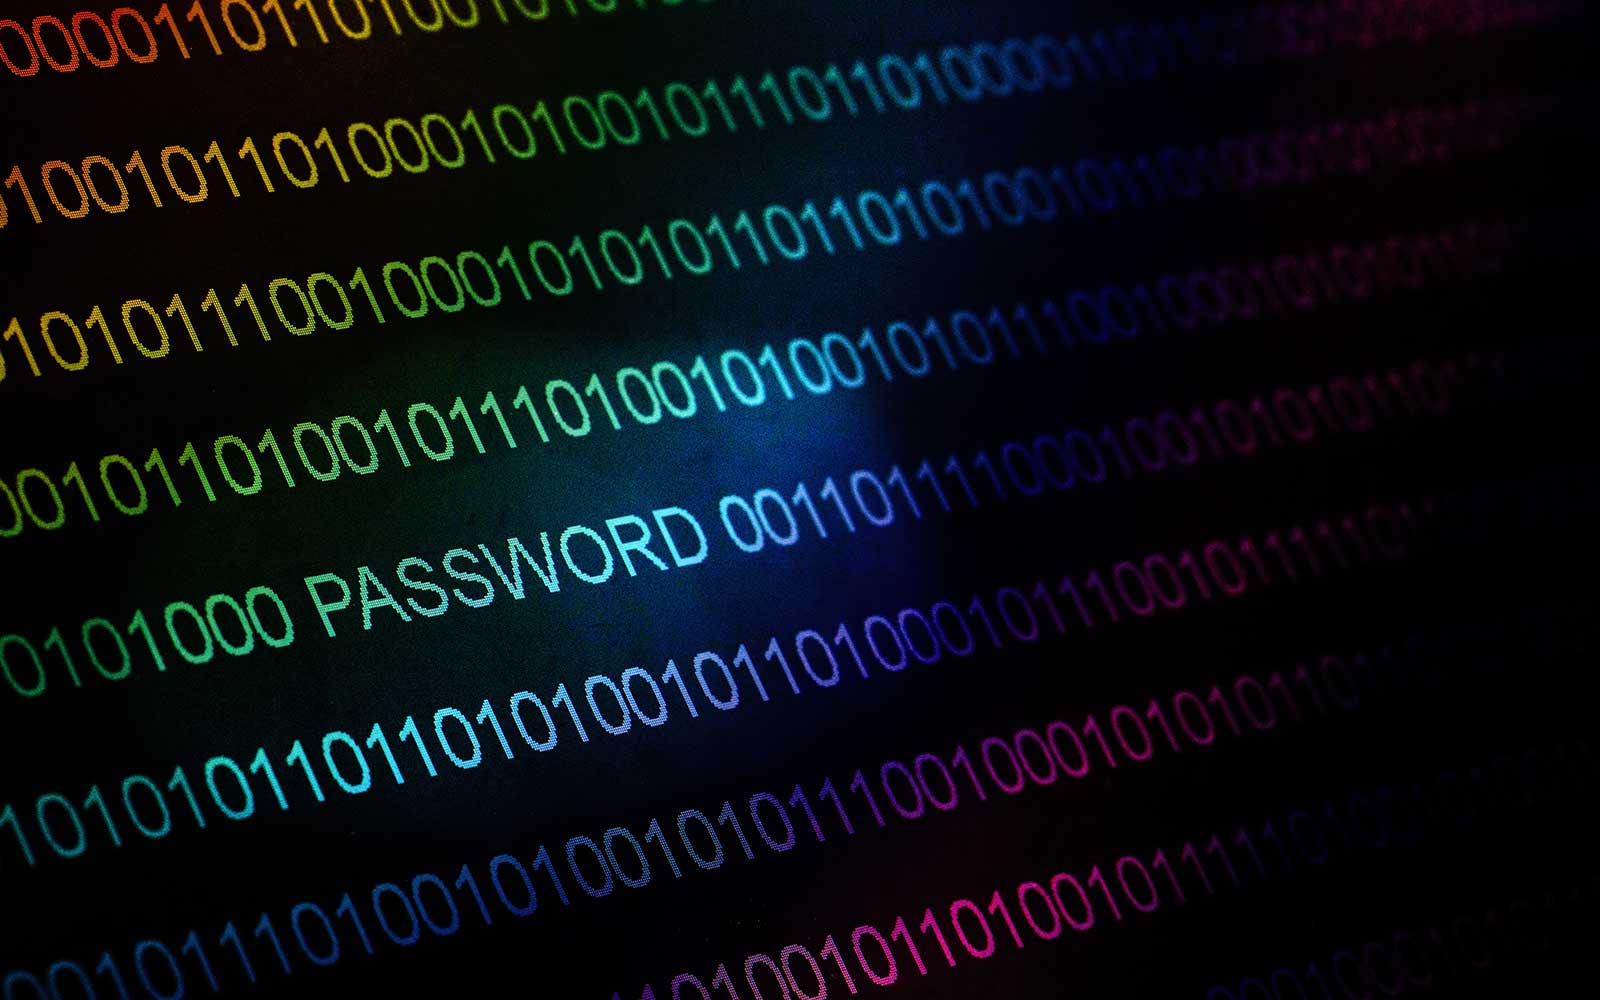 9 Helpful Tips To Beat The Password Game (& 1 Useless One)